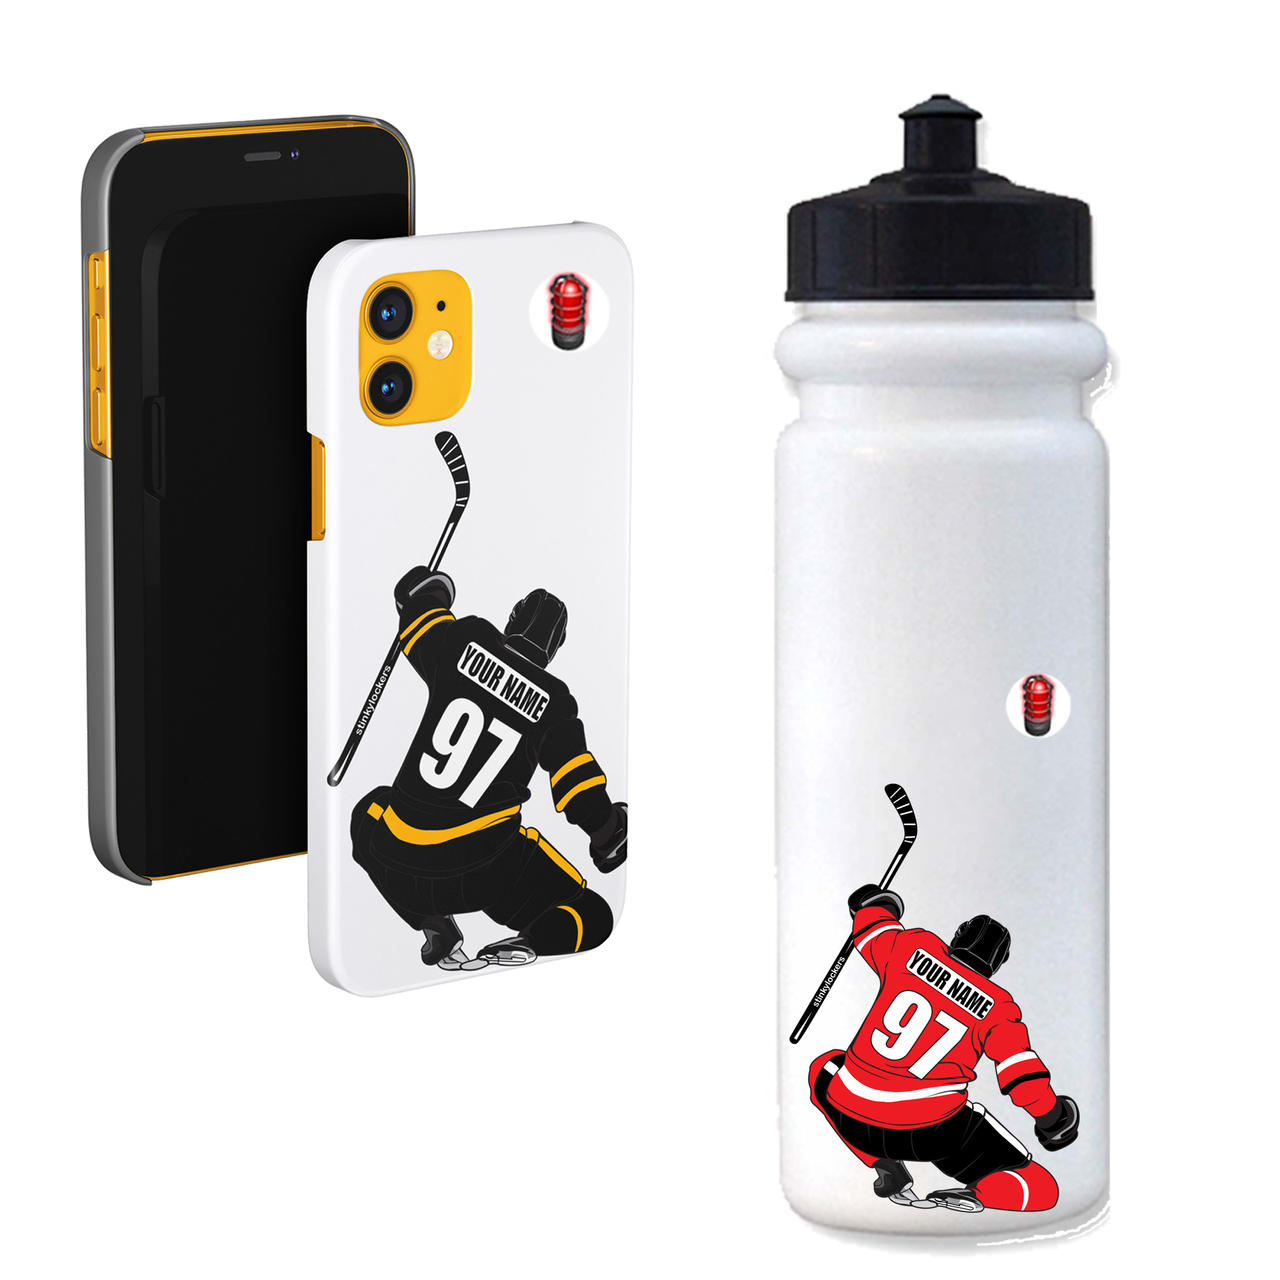 Hockey Celly Slide Sticker for your Water Bottle | Cell Phone | Laptop | Thermal Mug & More Questions & Answers